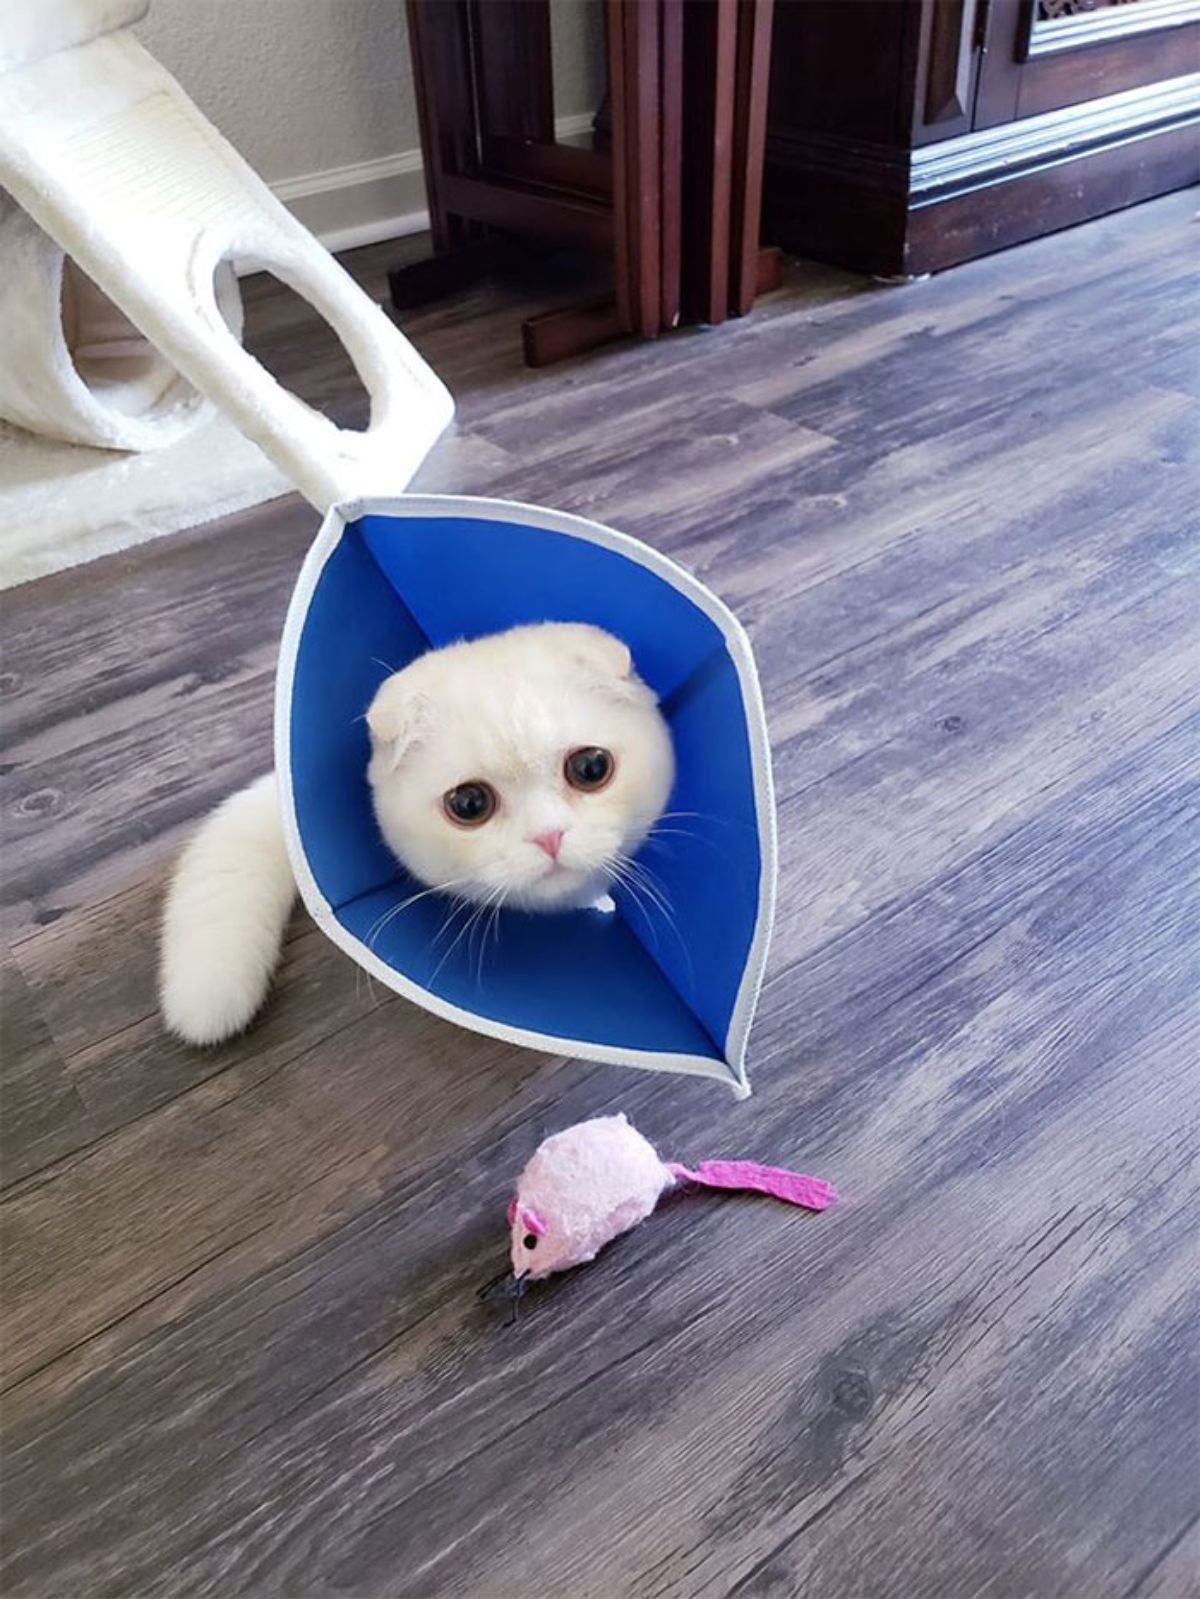 sad-looking white cat in a blue and white cone of shame